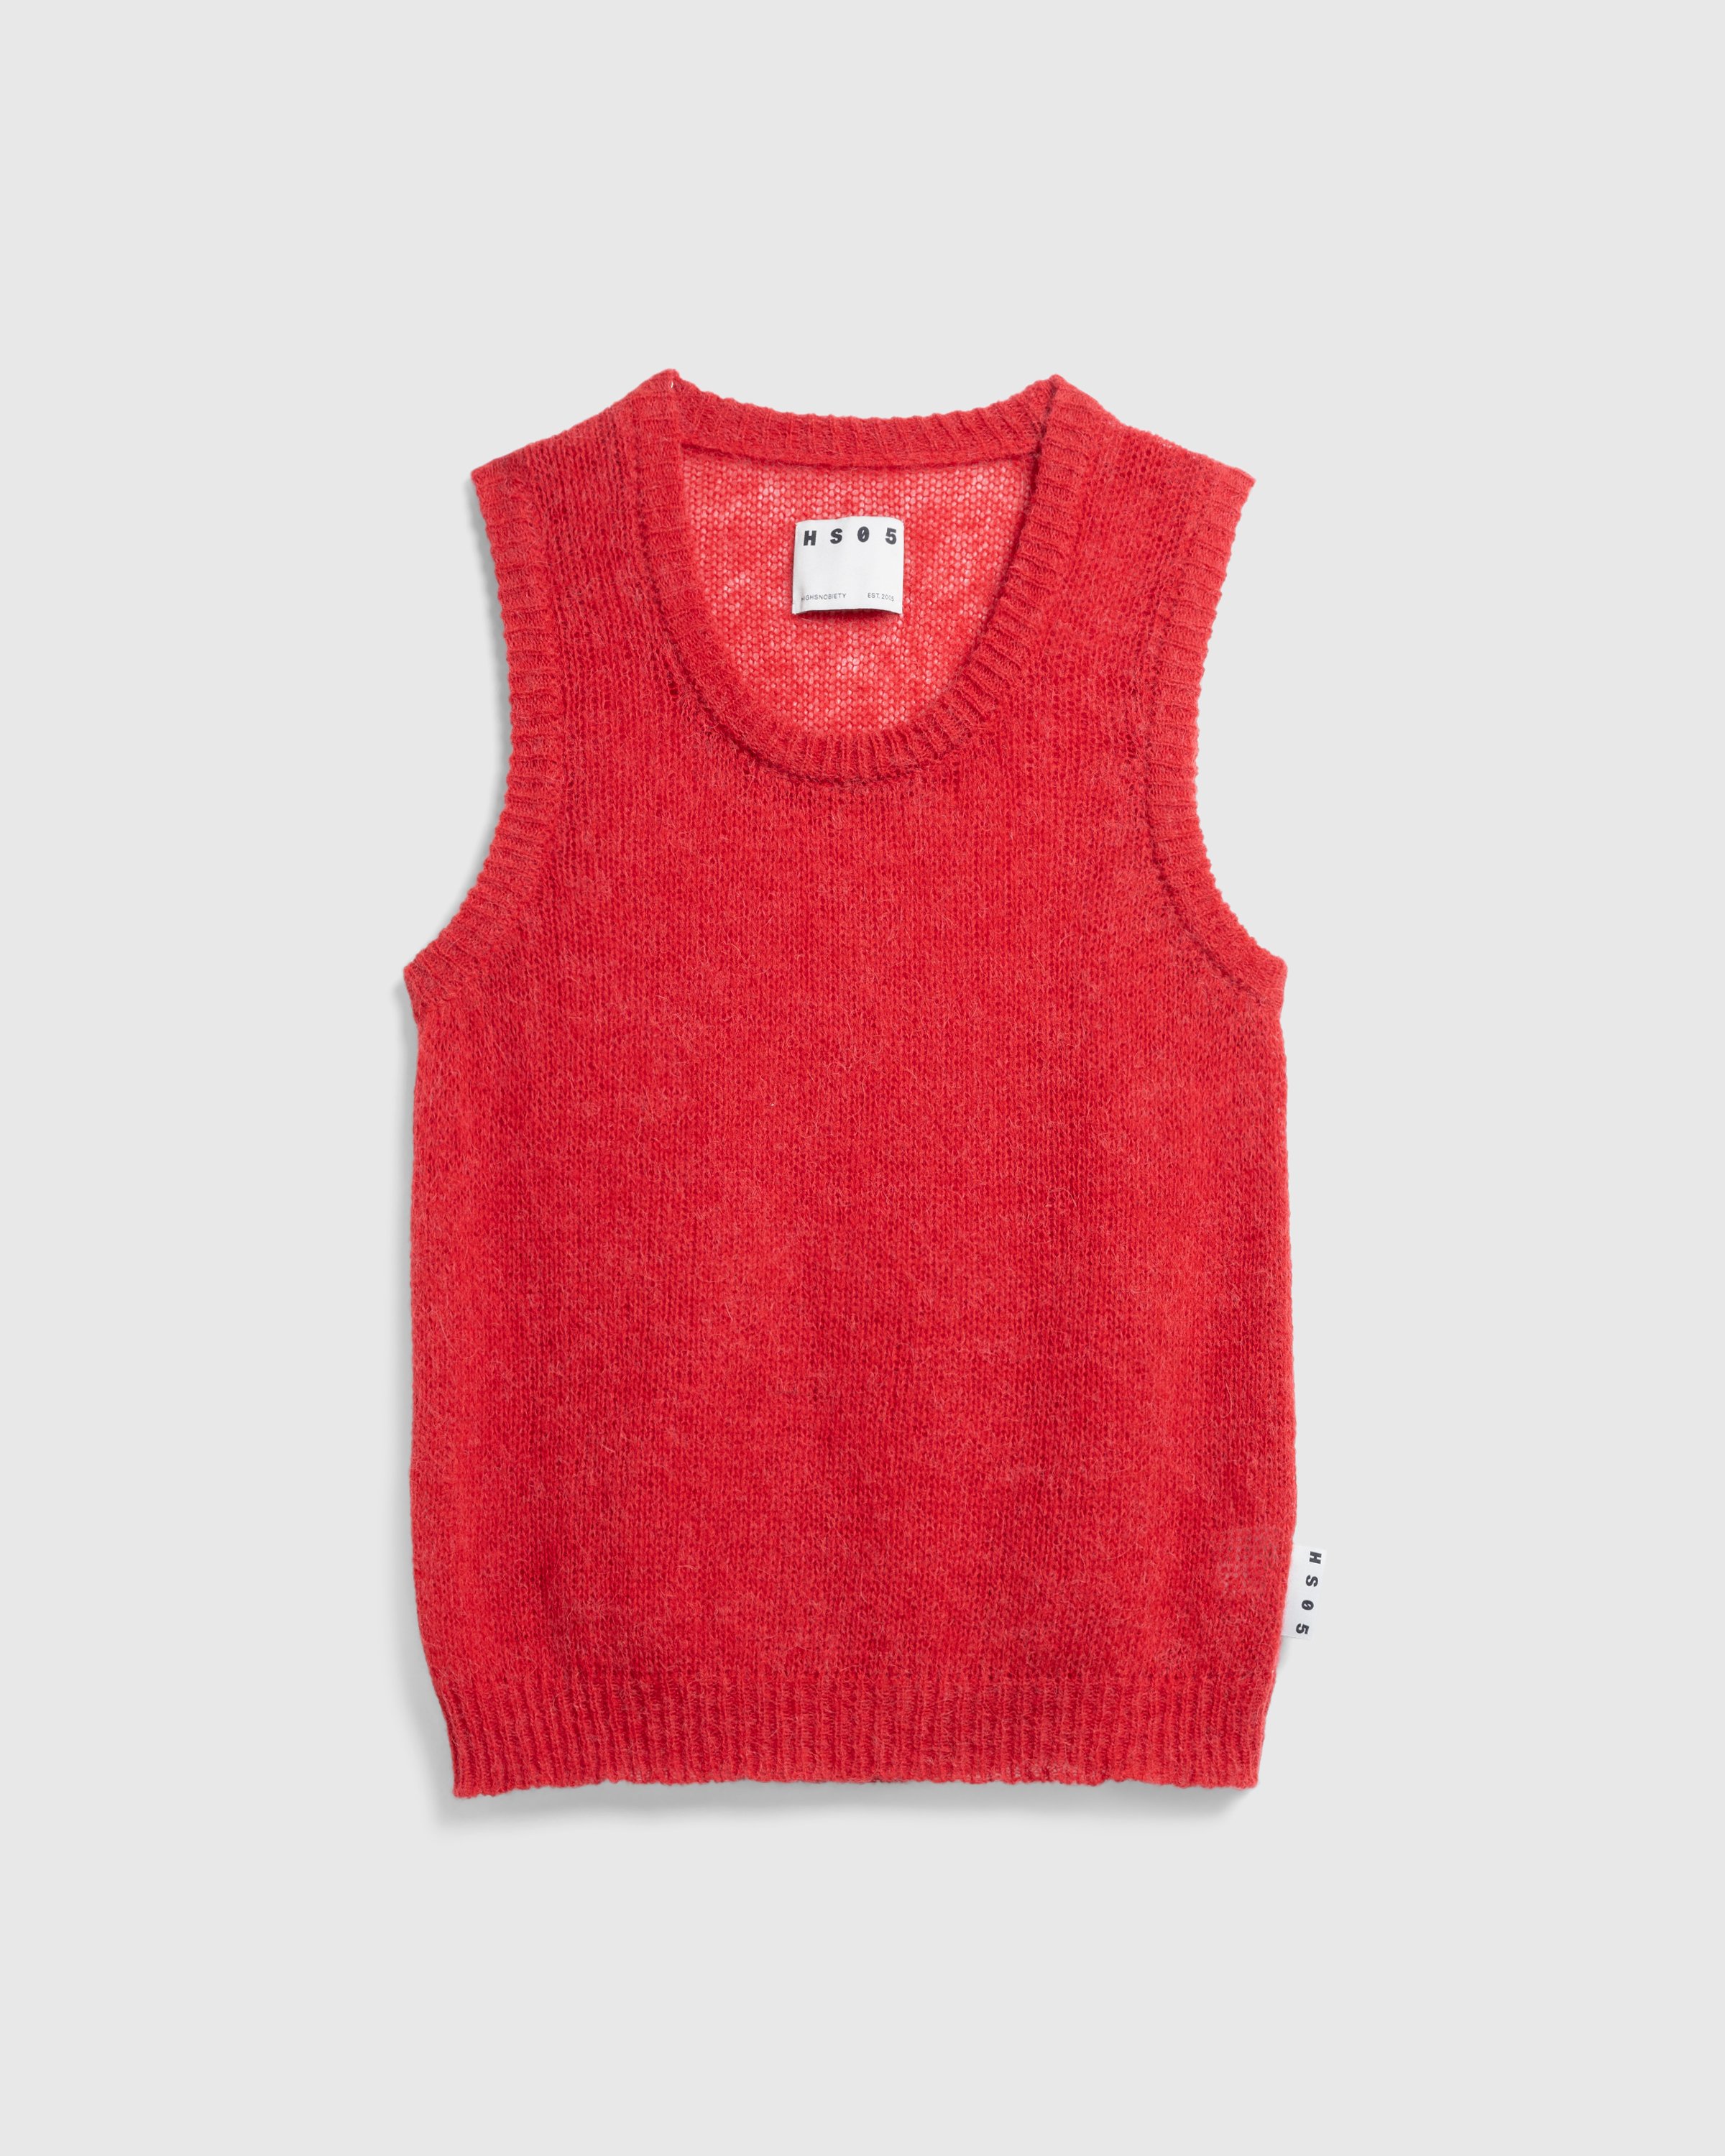 Highsnobiety HS05 - Loose Gage Tank Top Red - Clothing - Red - Image 1